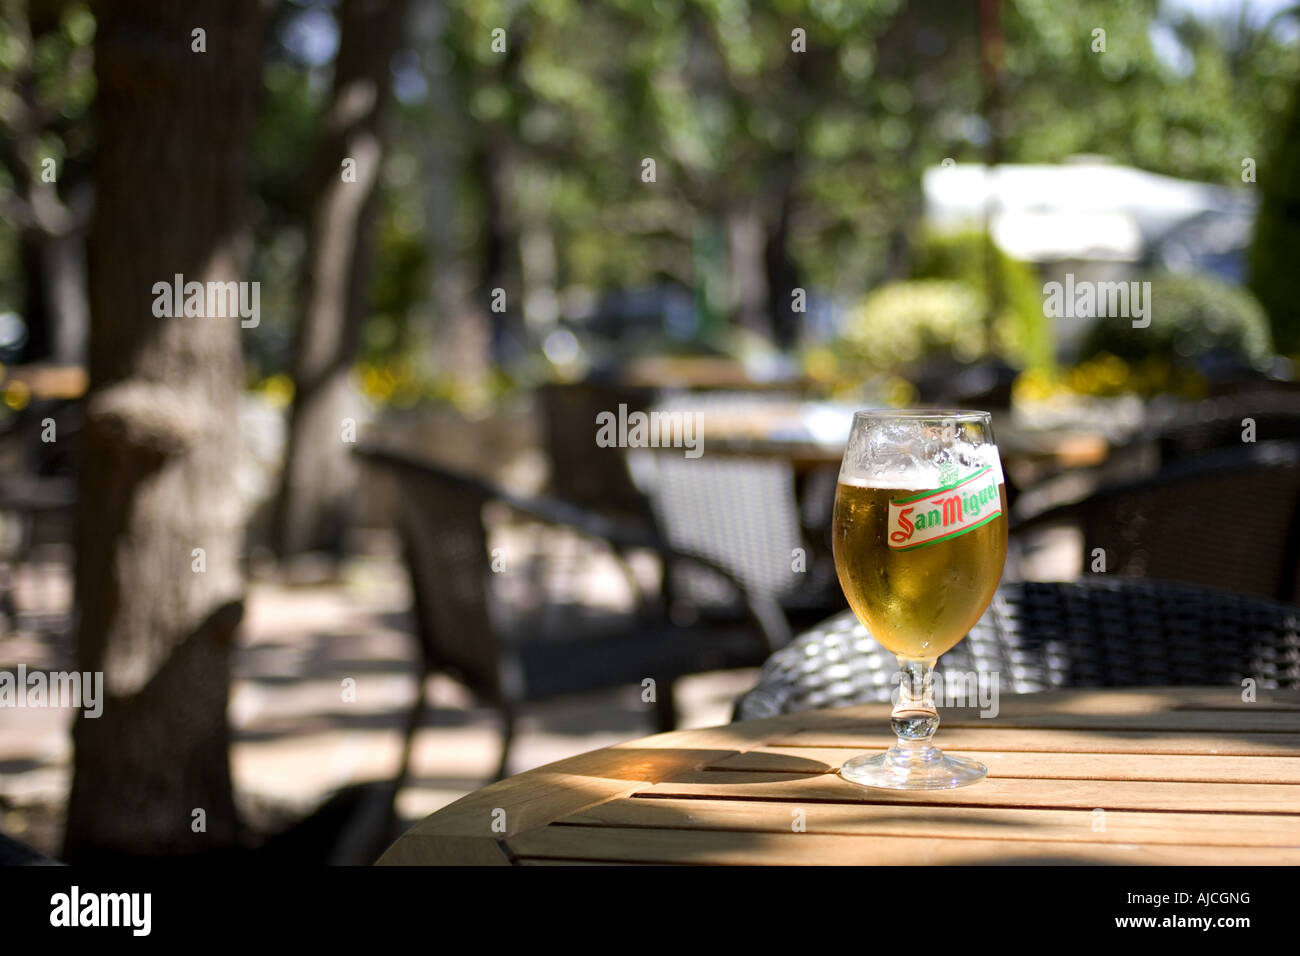 Lager glass on table  Stock Photo